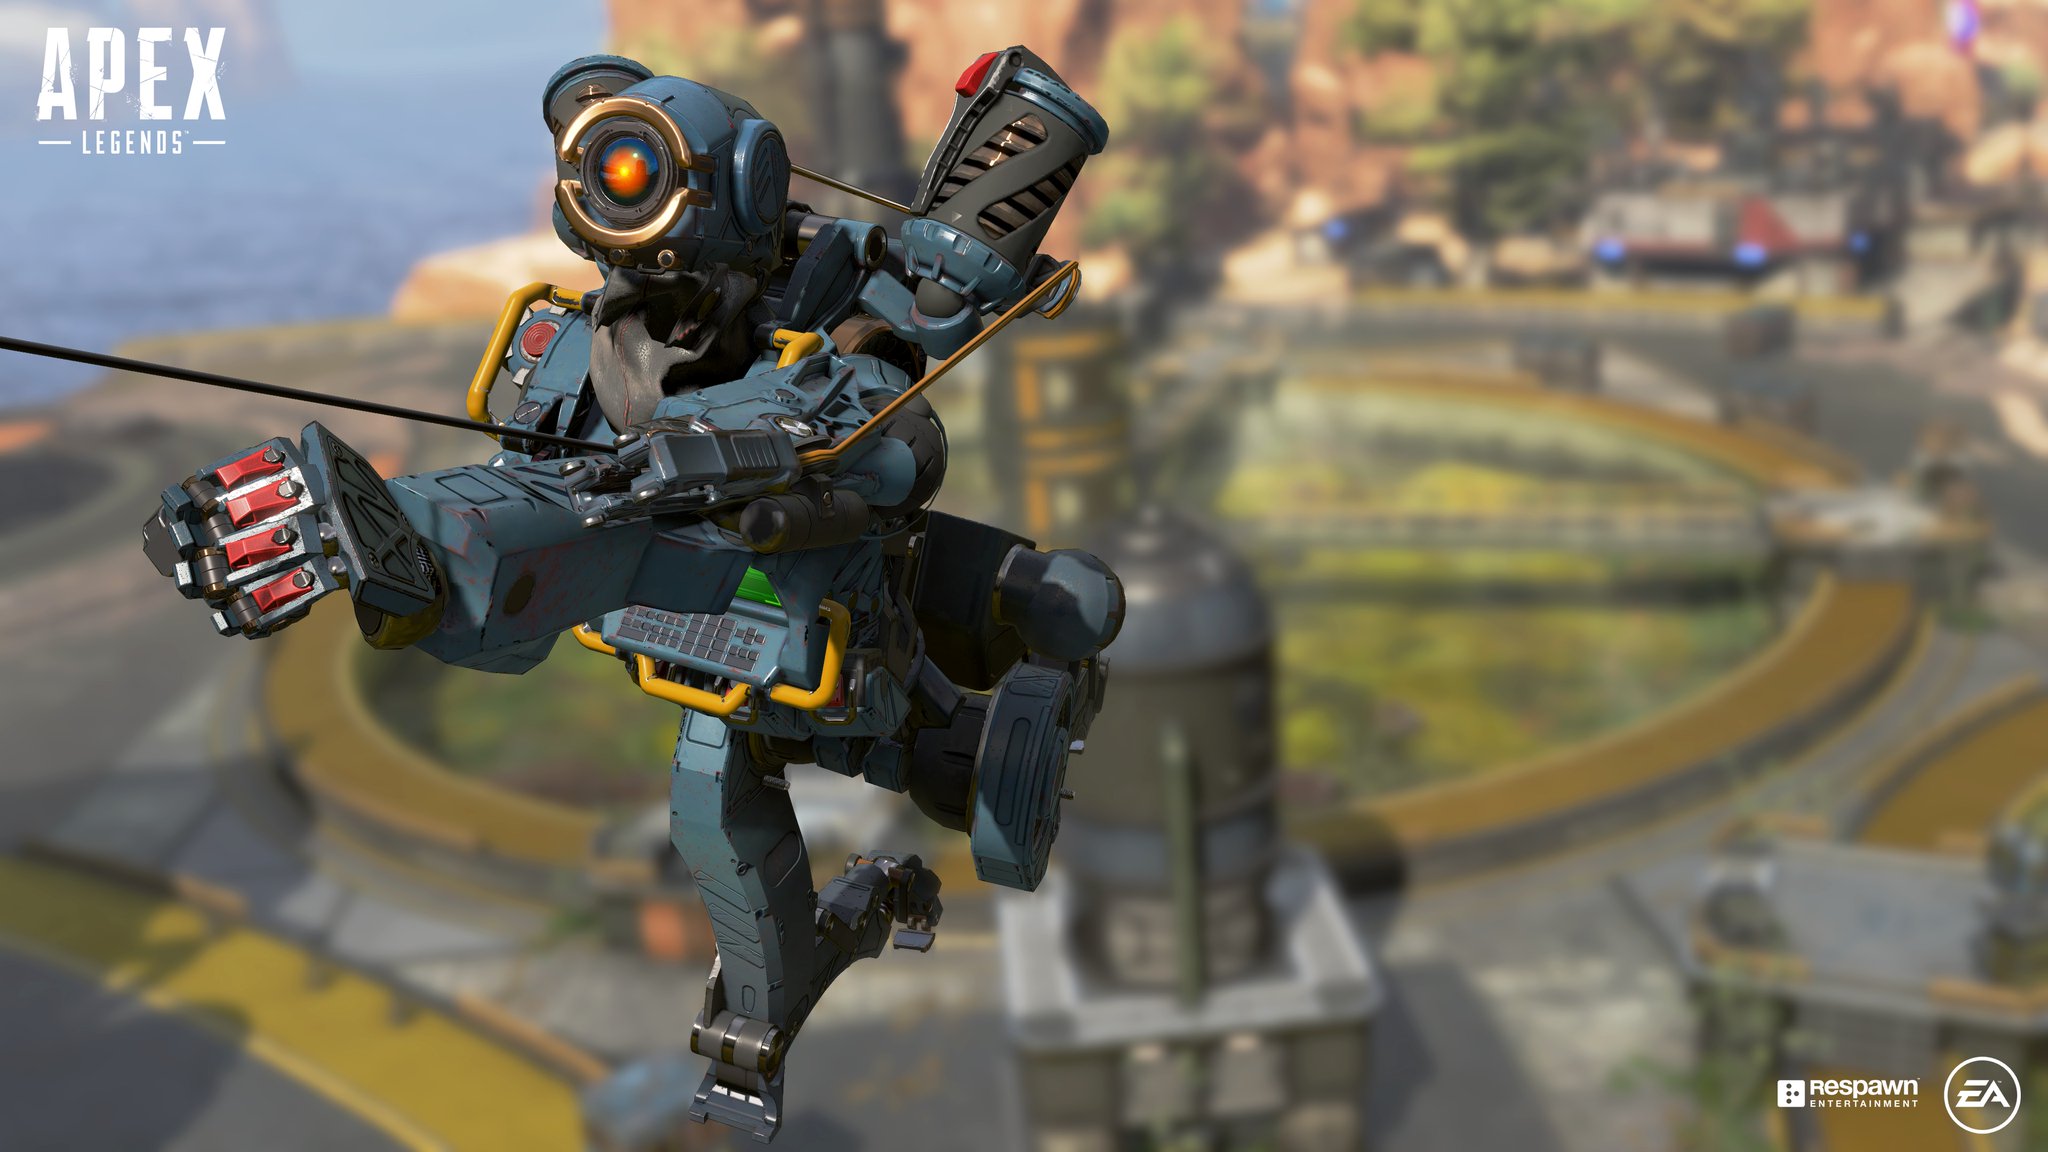 Apex legends patch notes peacekeeper